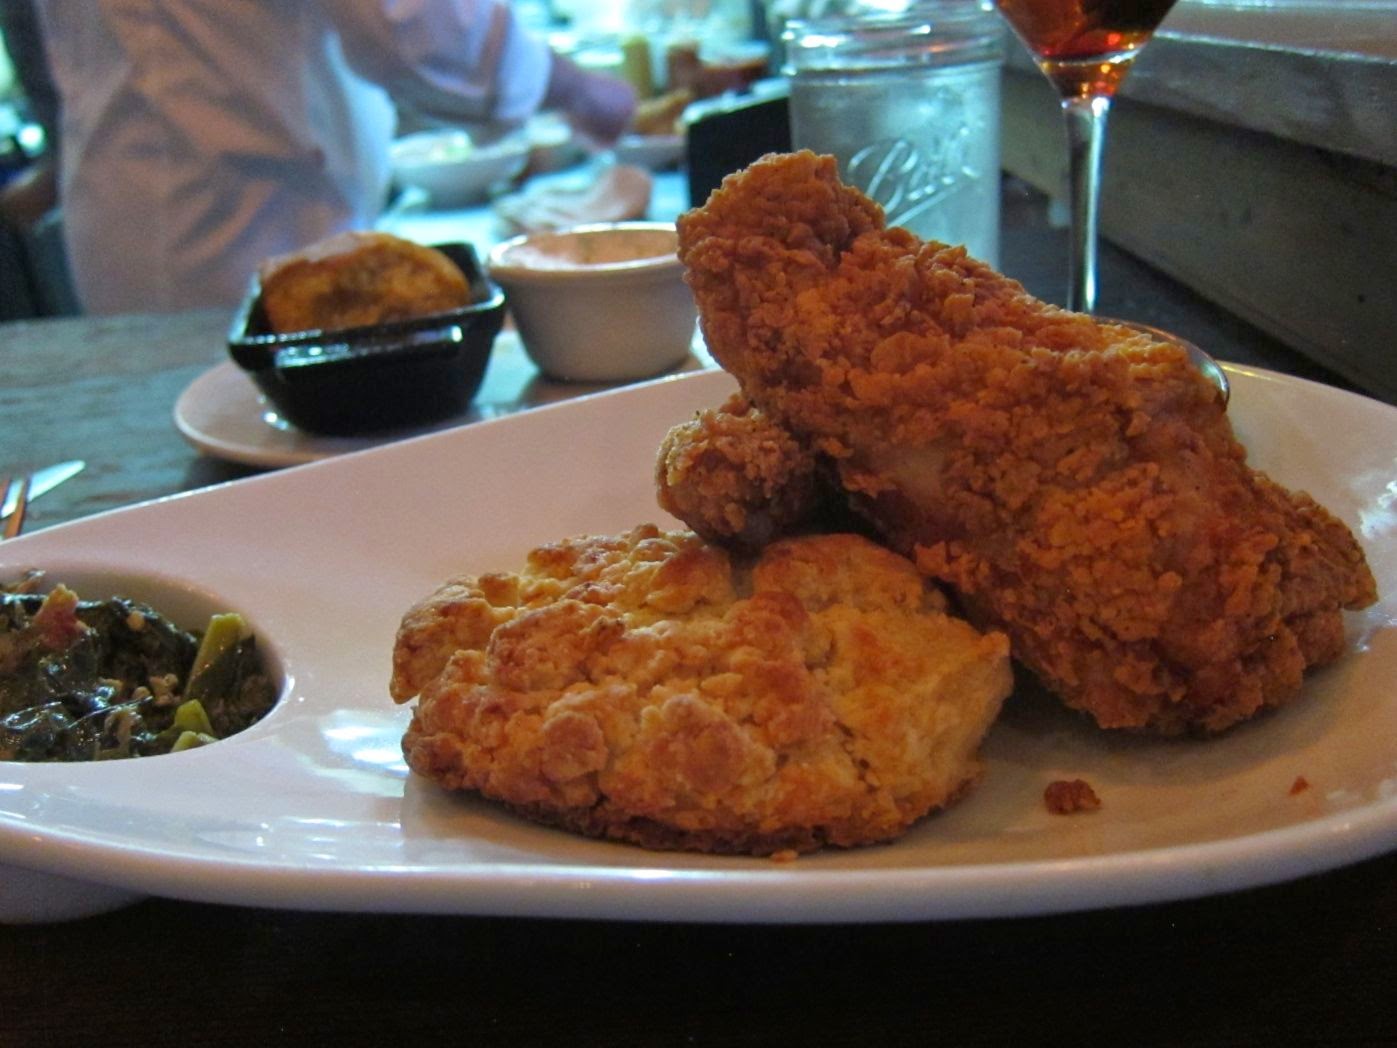 Fried chicken at Hops & Hominy, SF